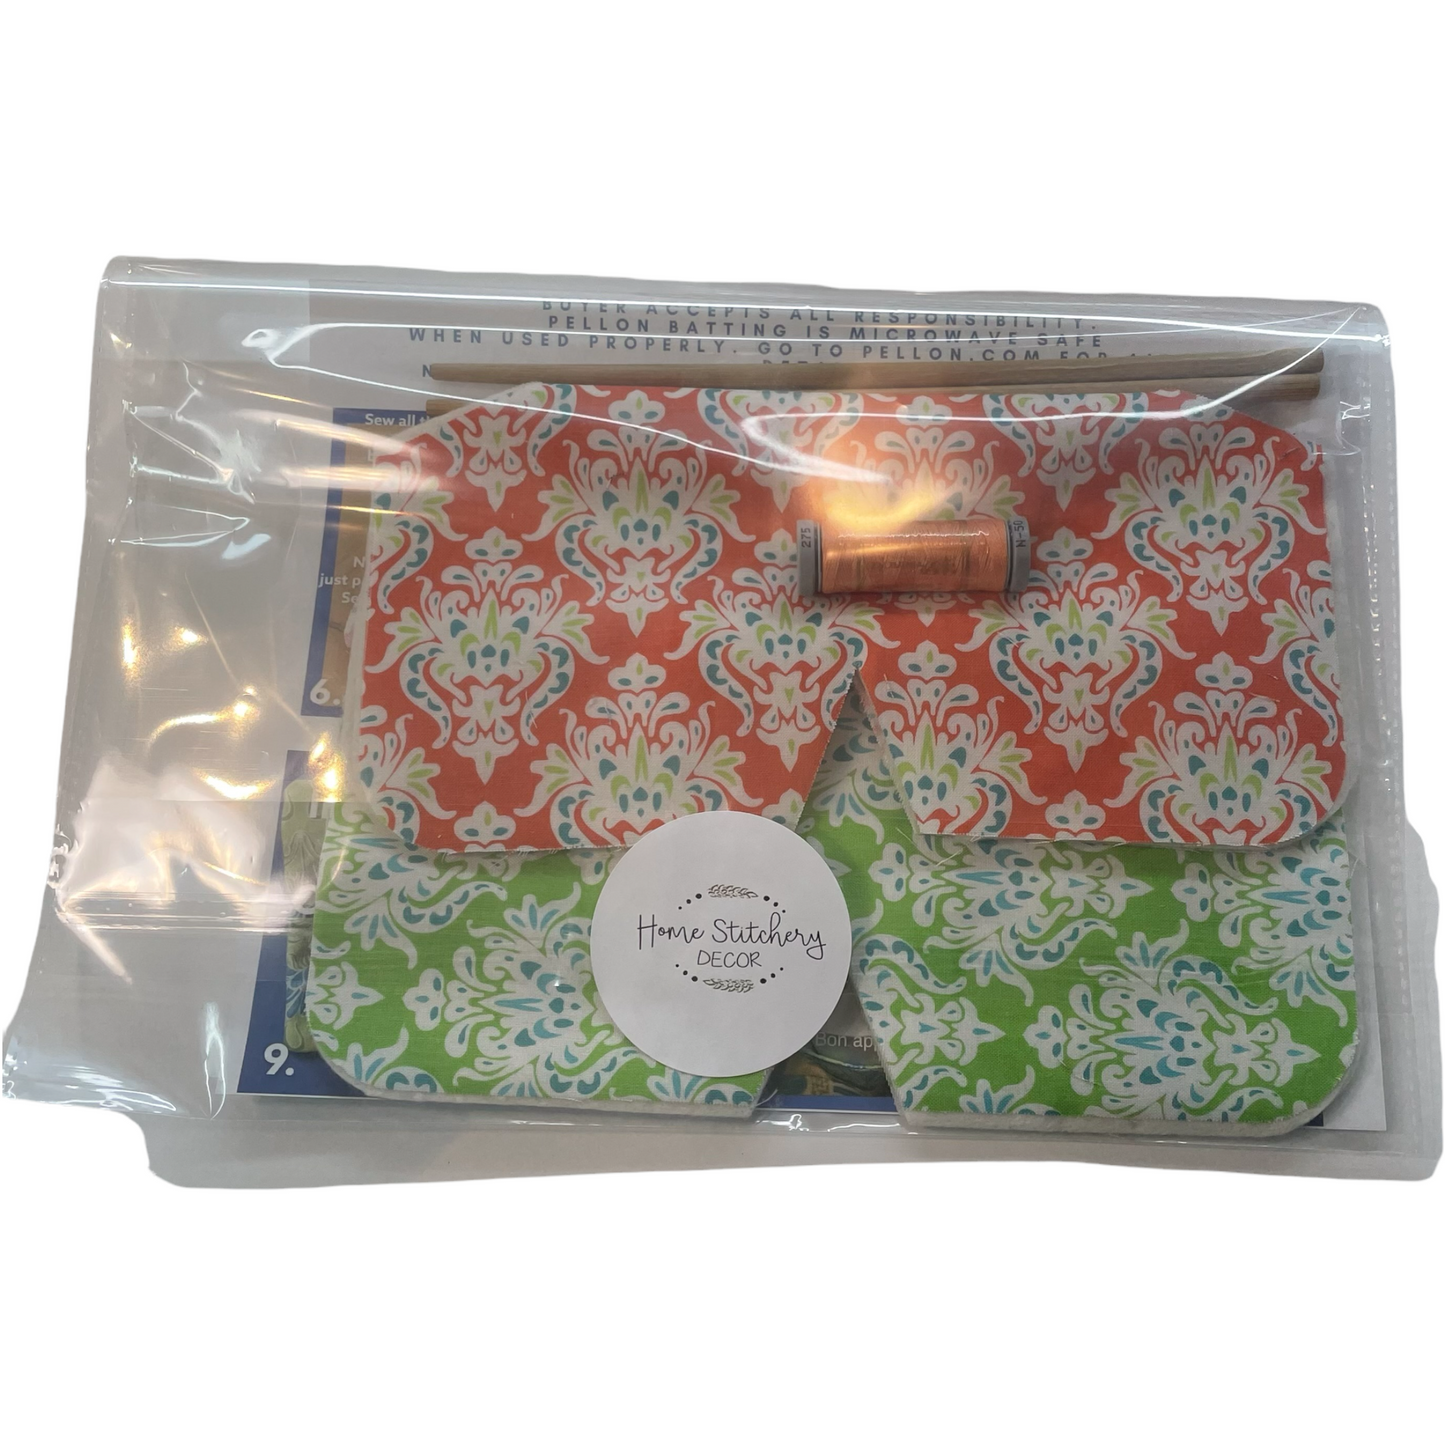 Microwave Bowl Cozy Kit with FREE Pattern – Aurora Sewing Center